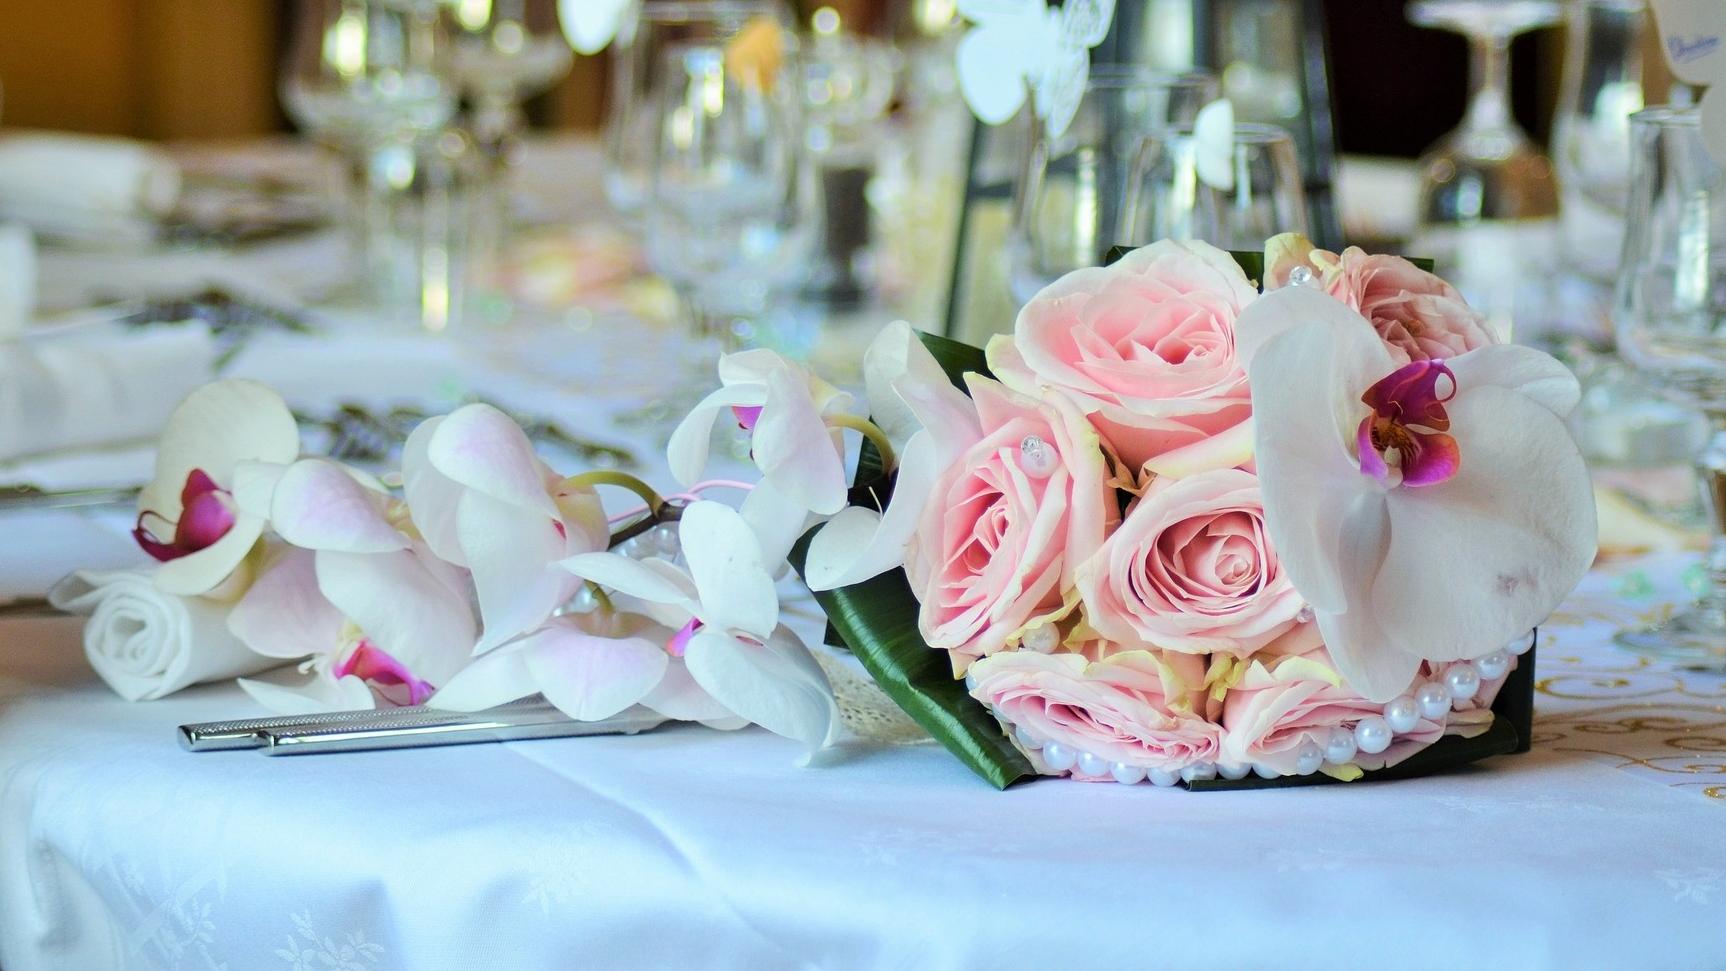 Wedding Venues for Hire in North Sydney